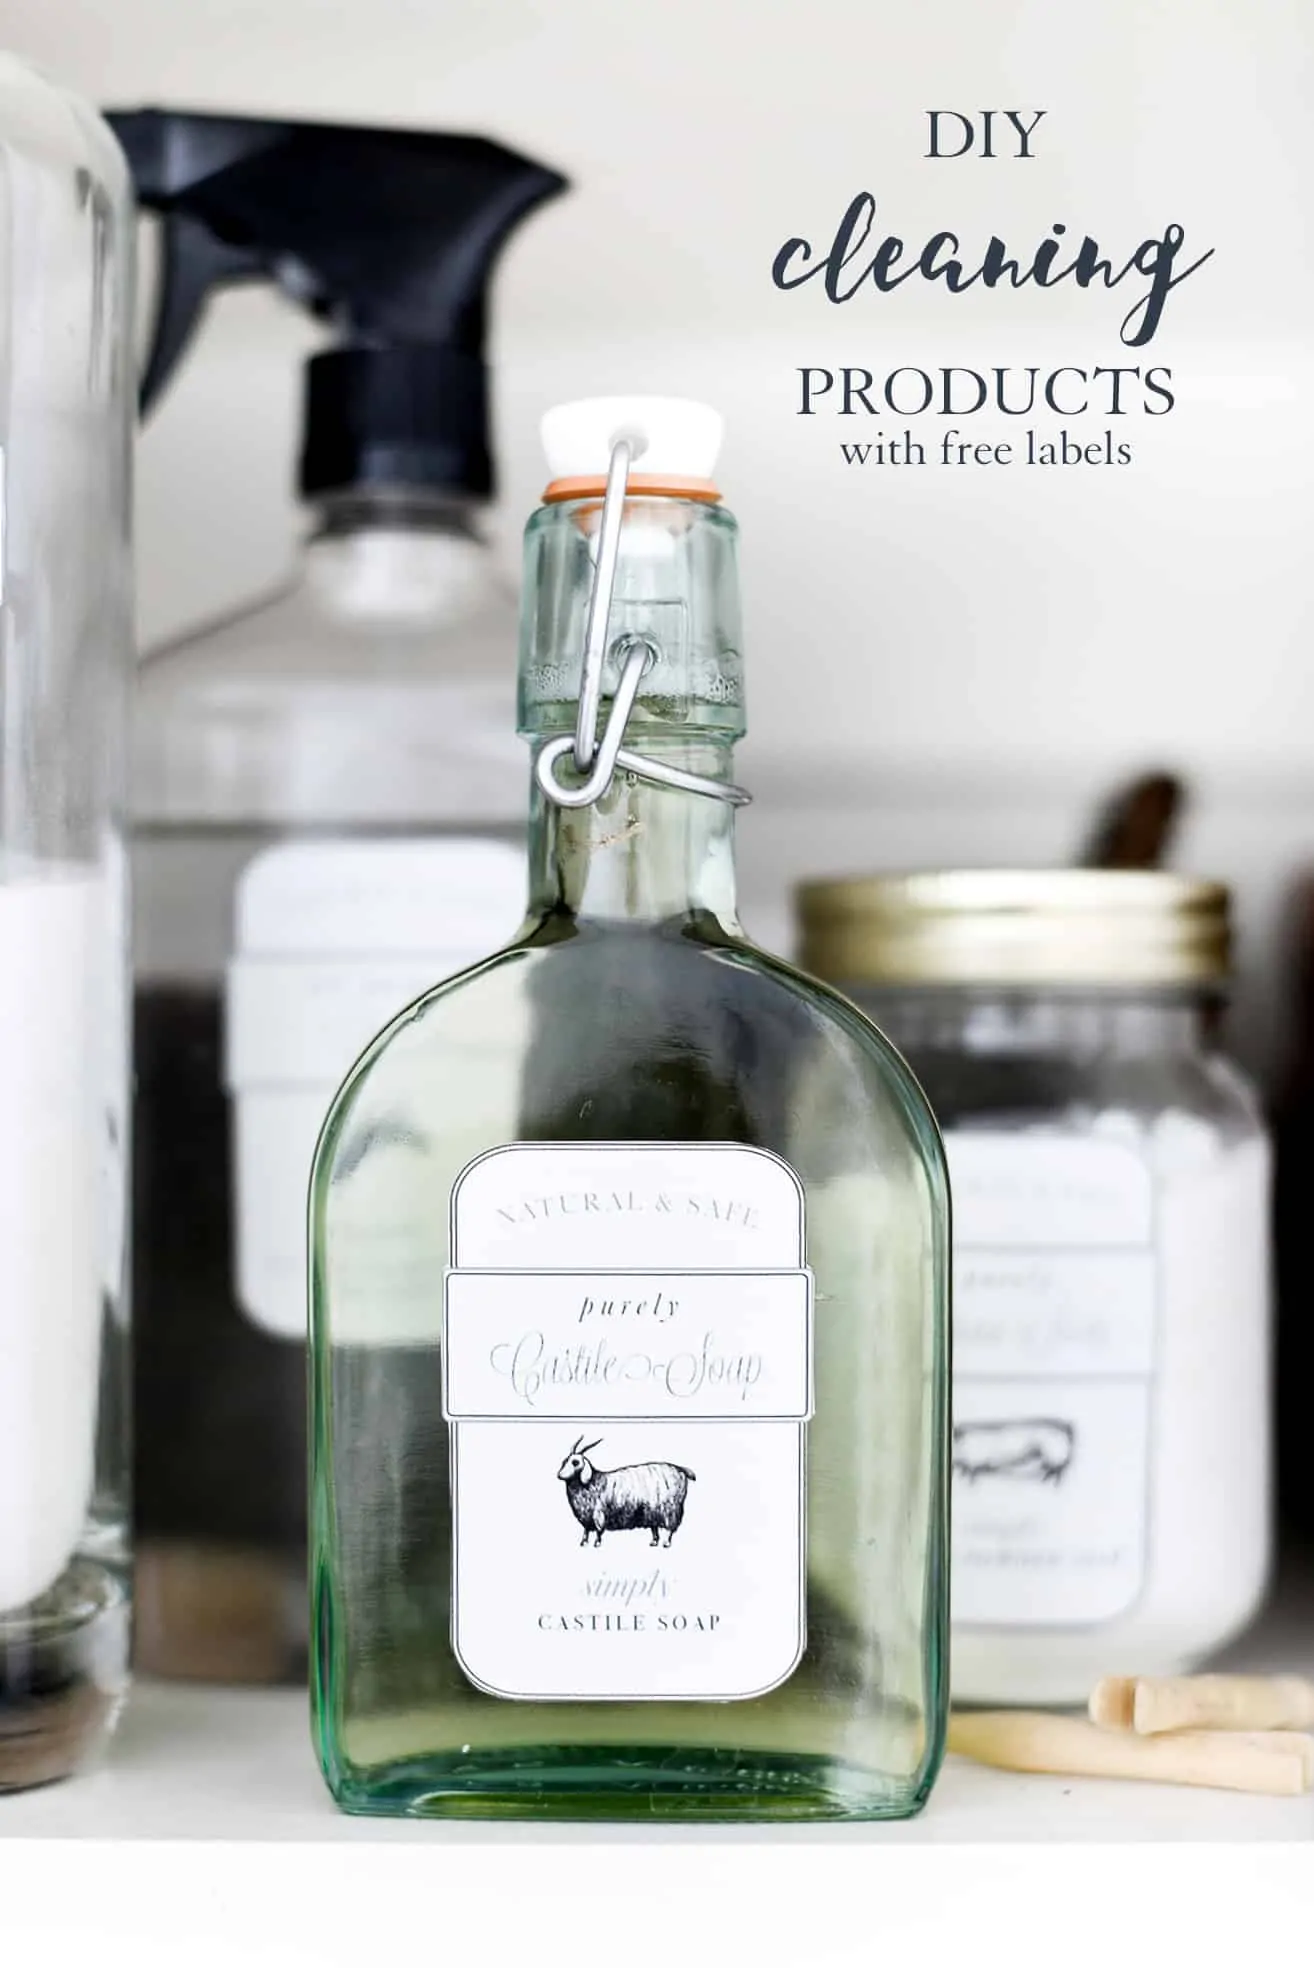 diy cleaning products with free printable labels with farm animals